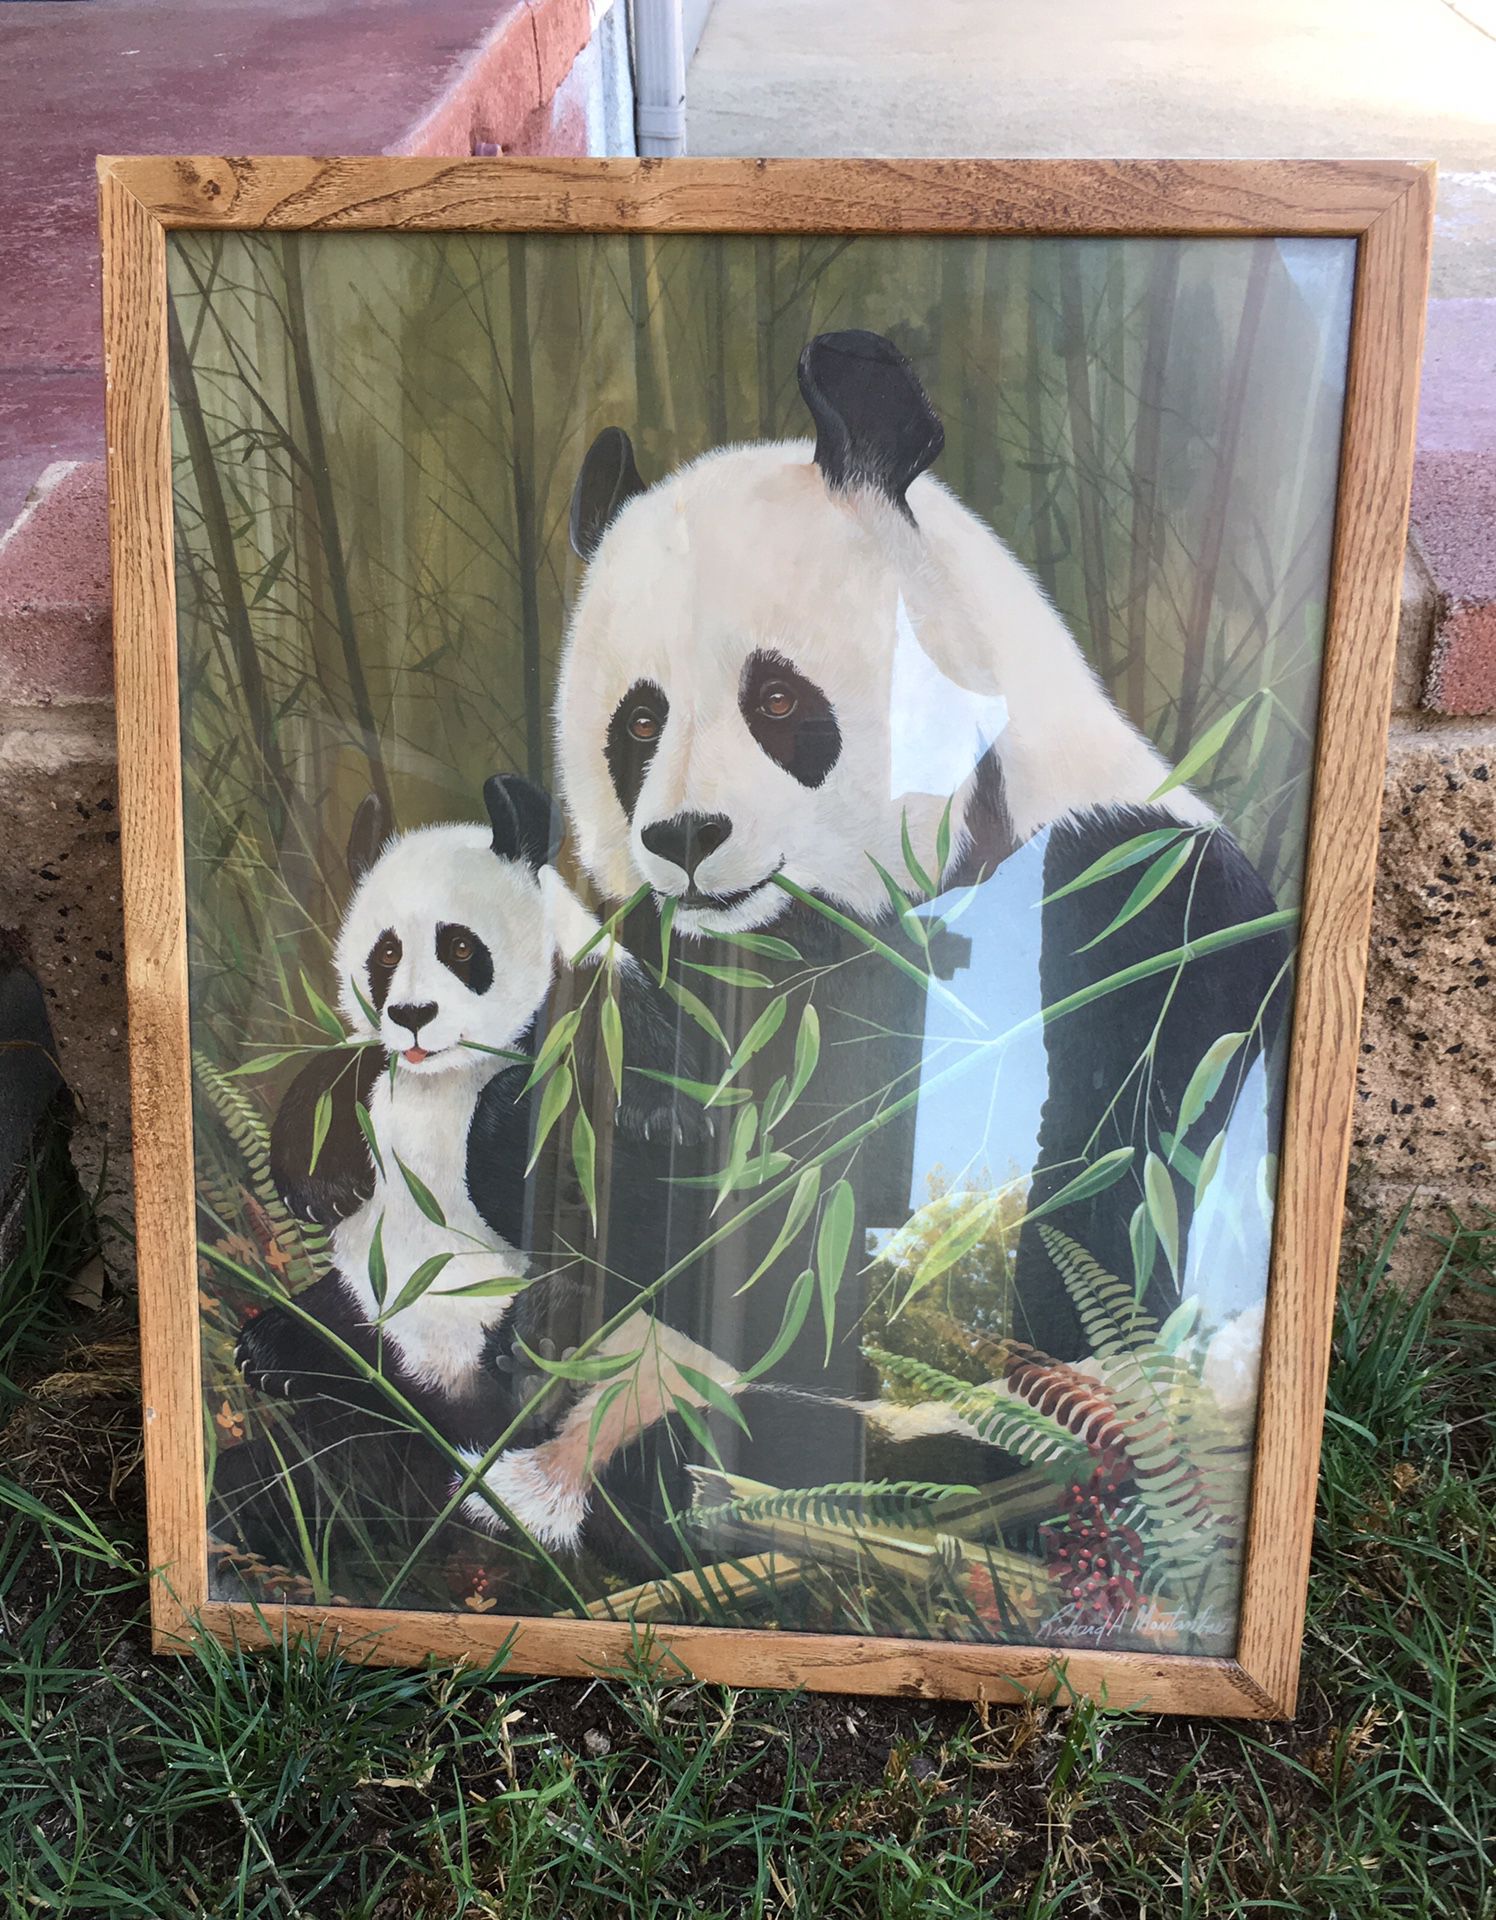 Framed picture of panda